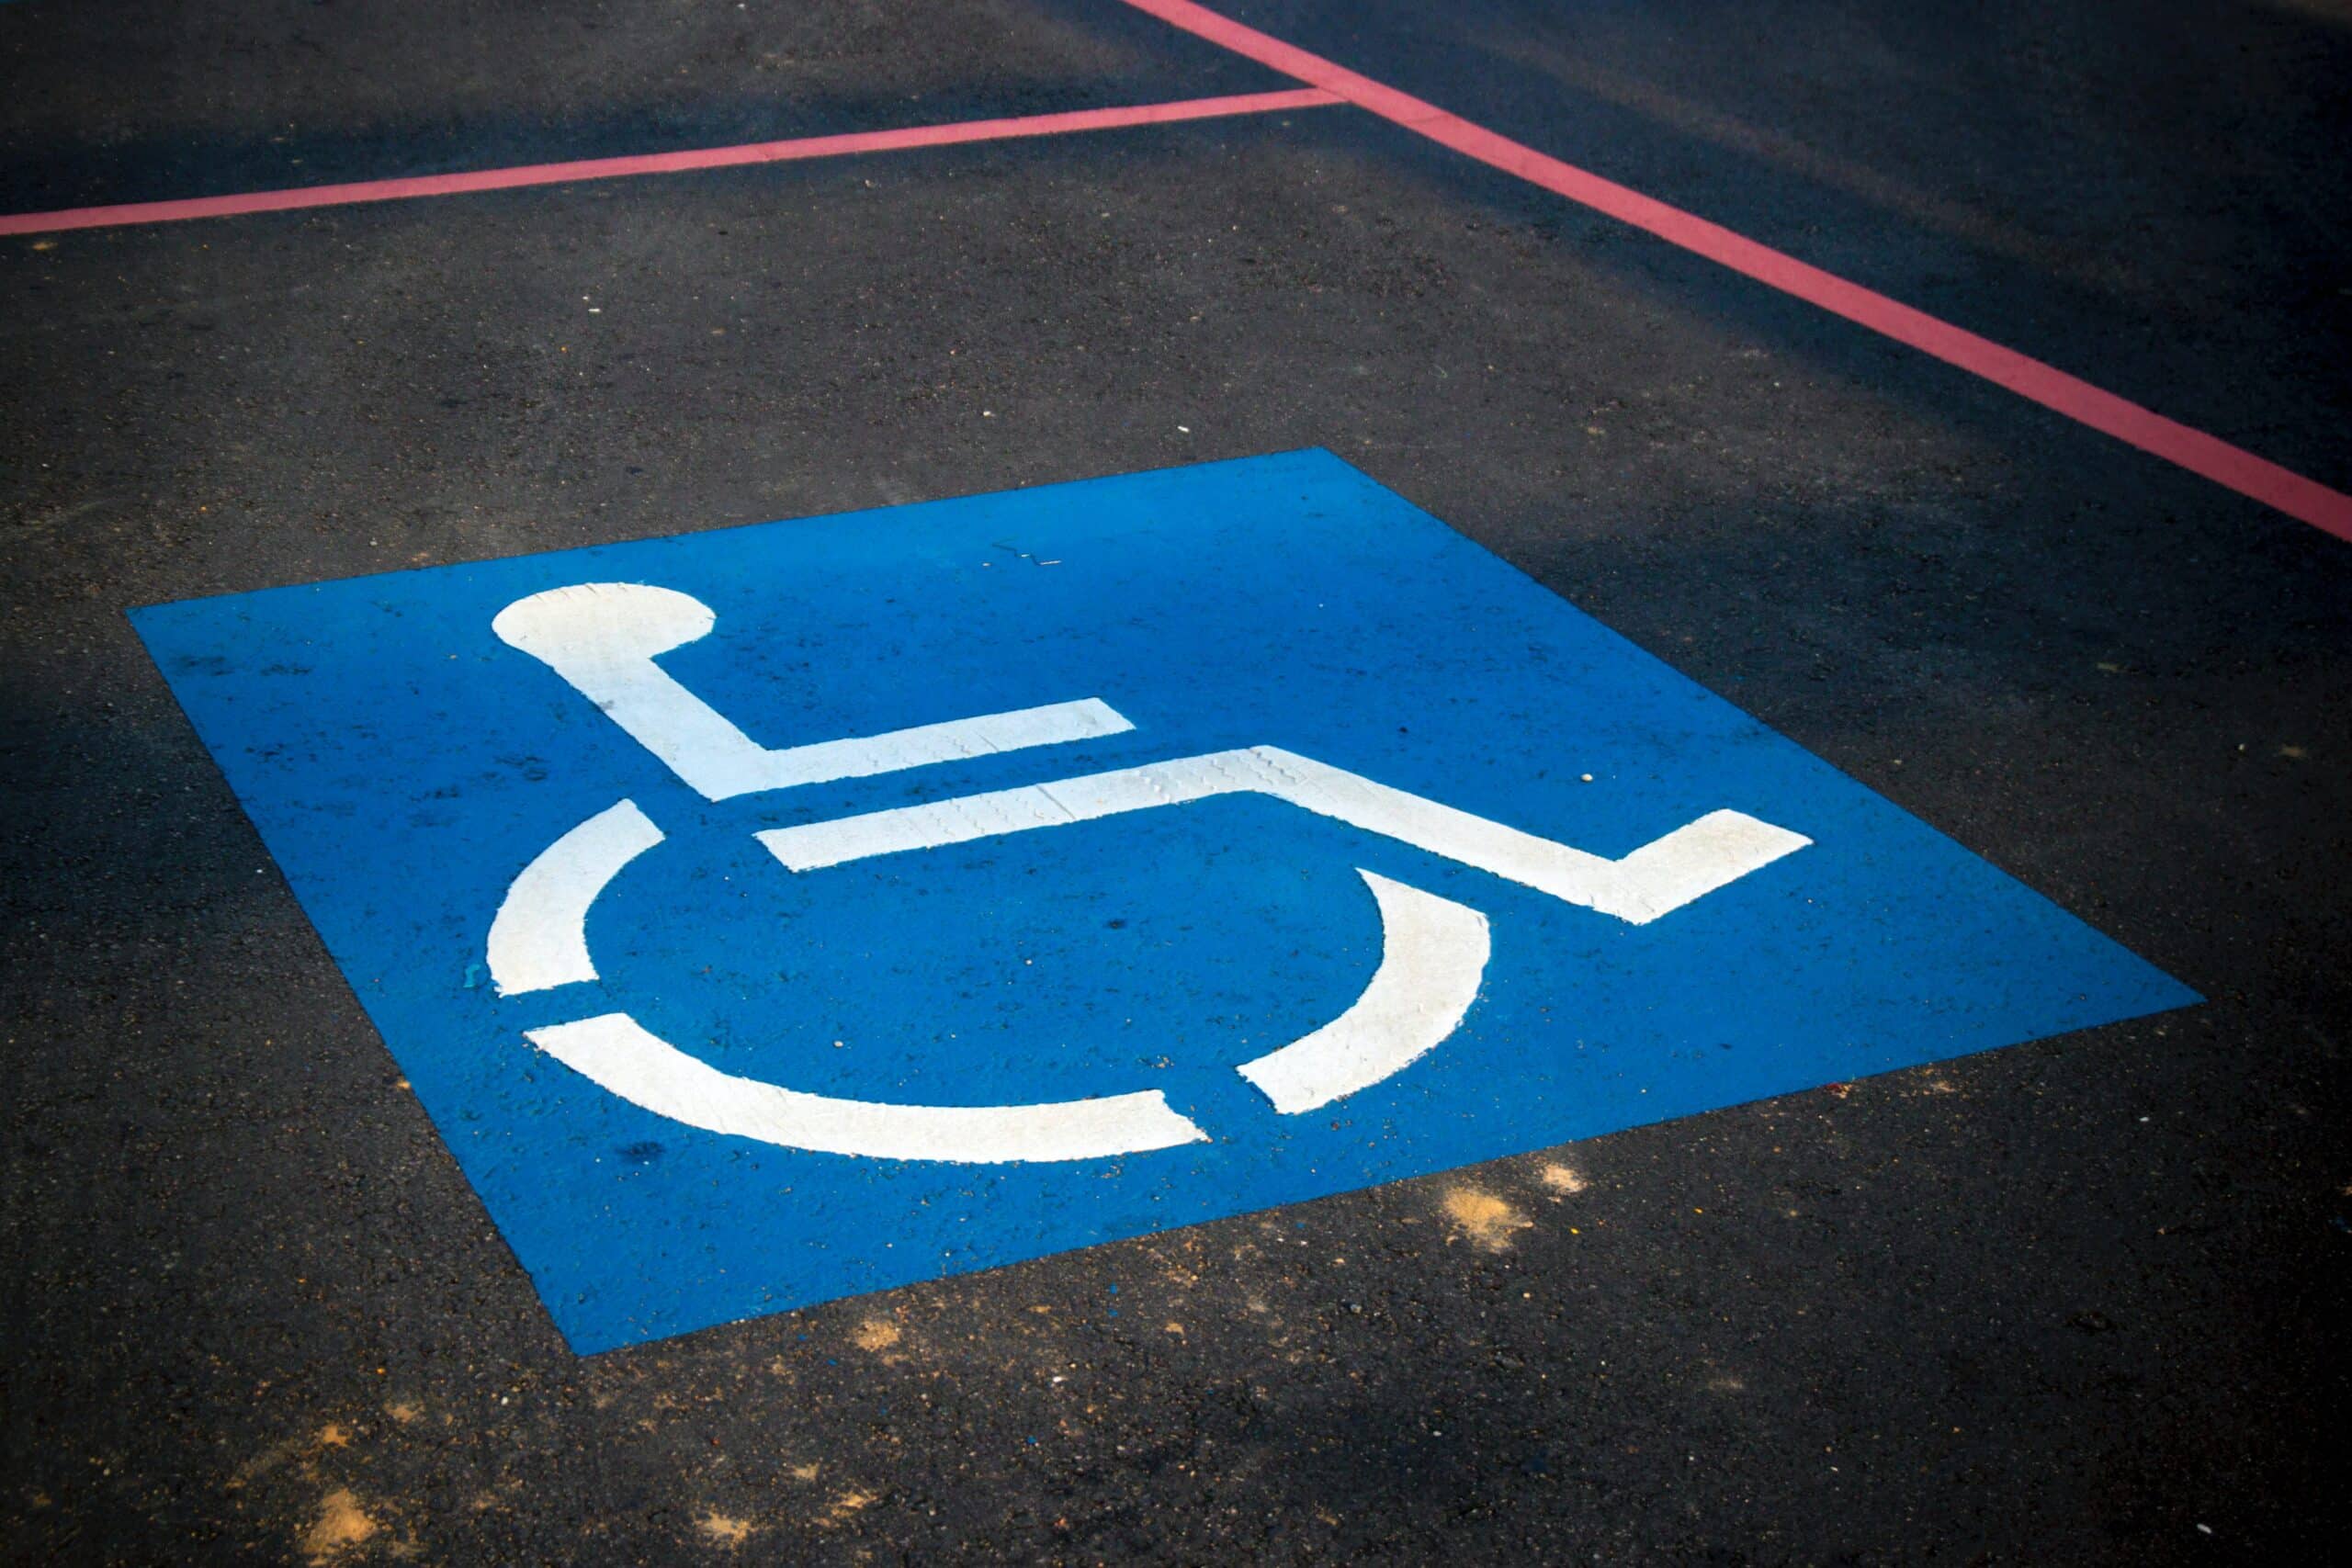 A blue and white handicap logo in a parking spot, representing disability benefits laws in Canada